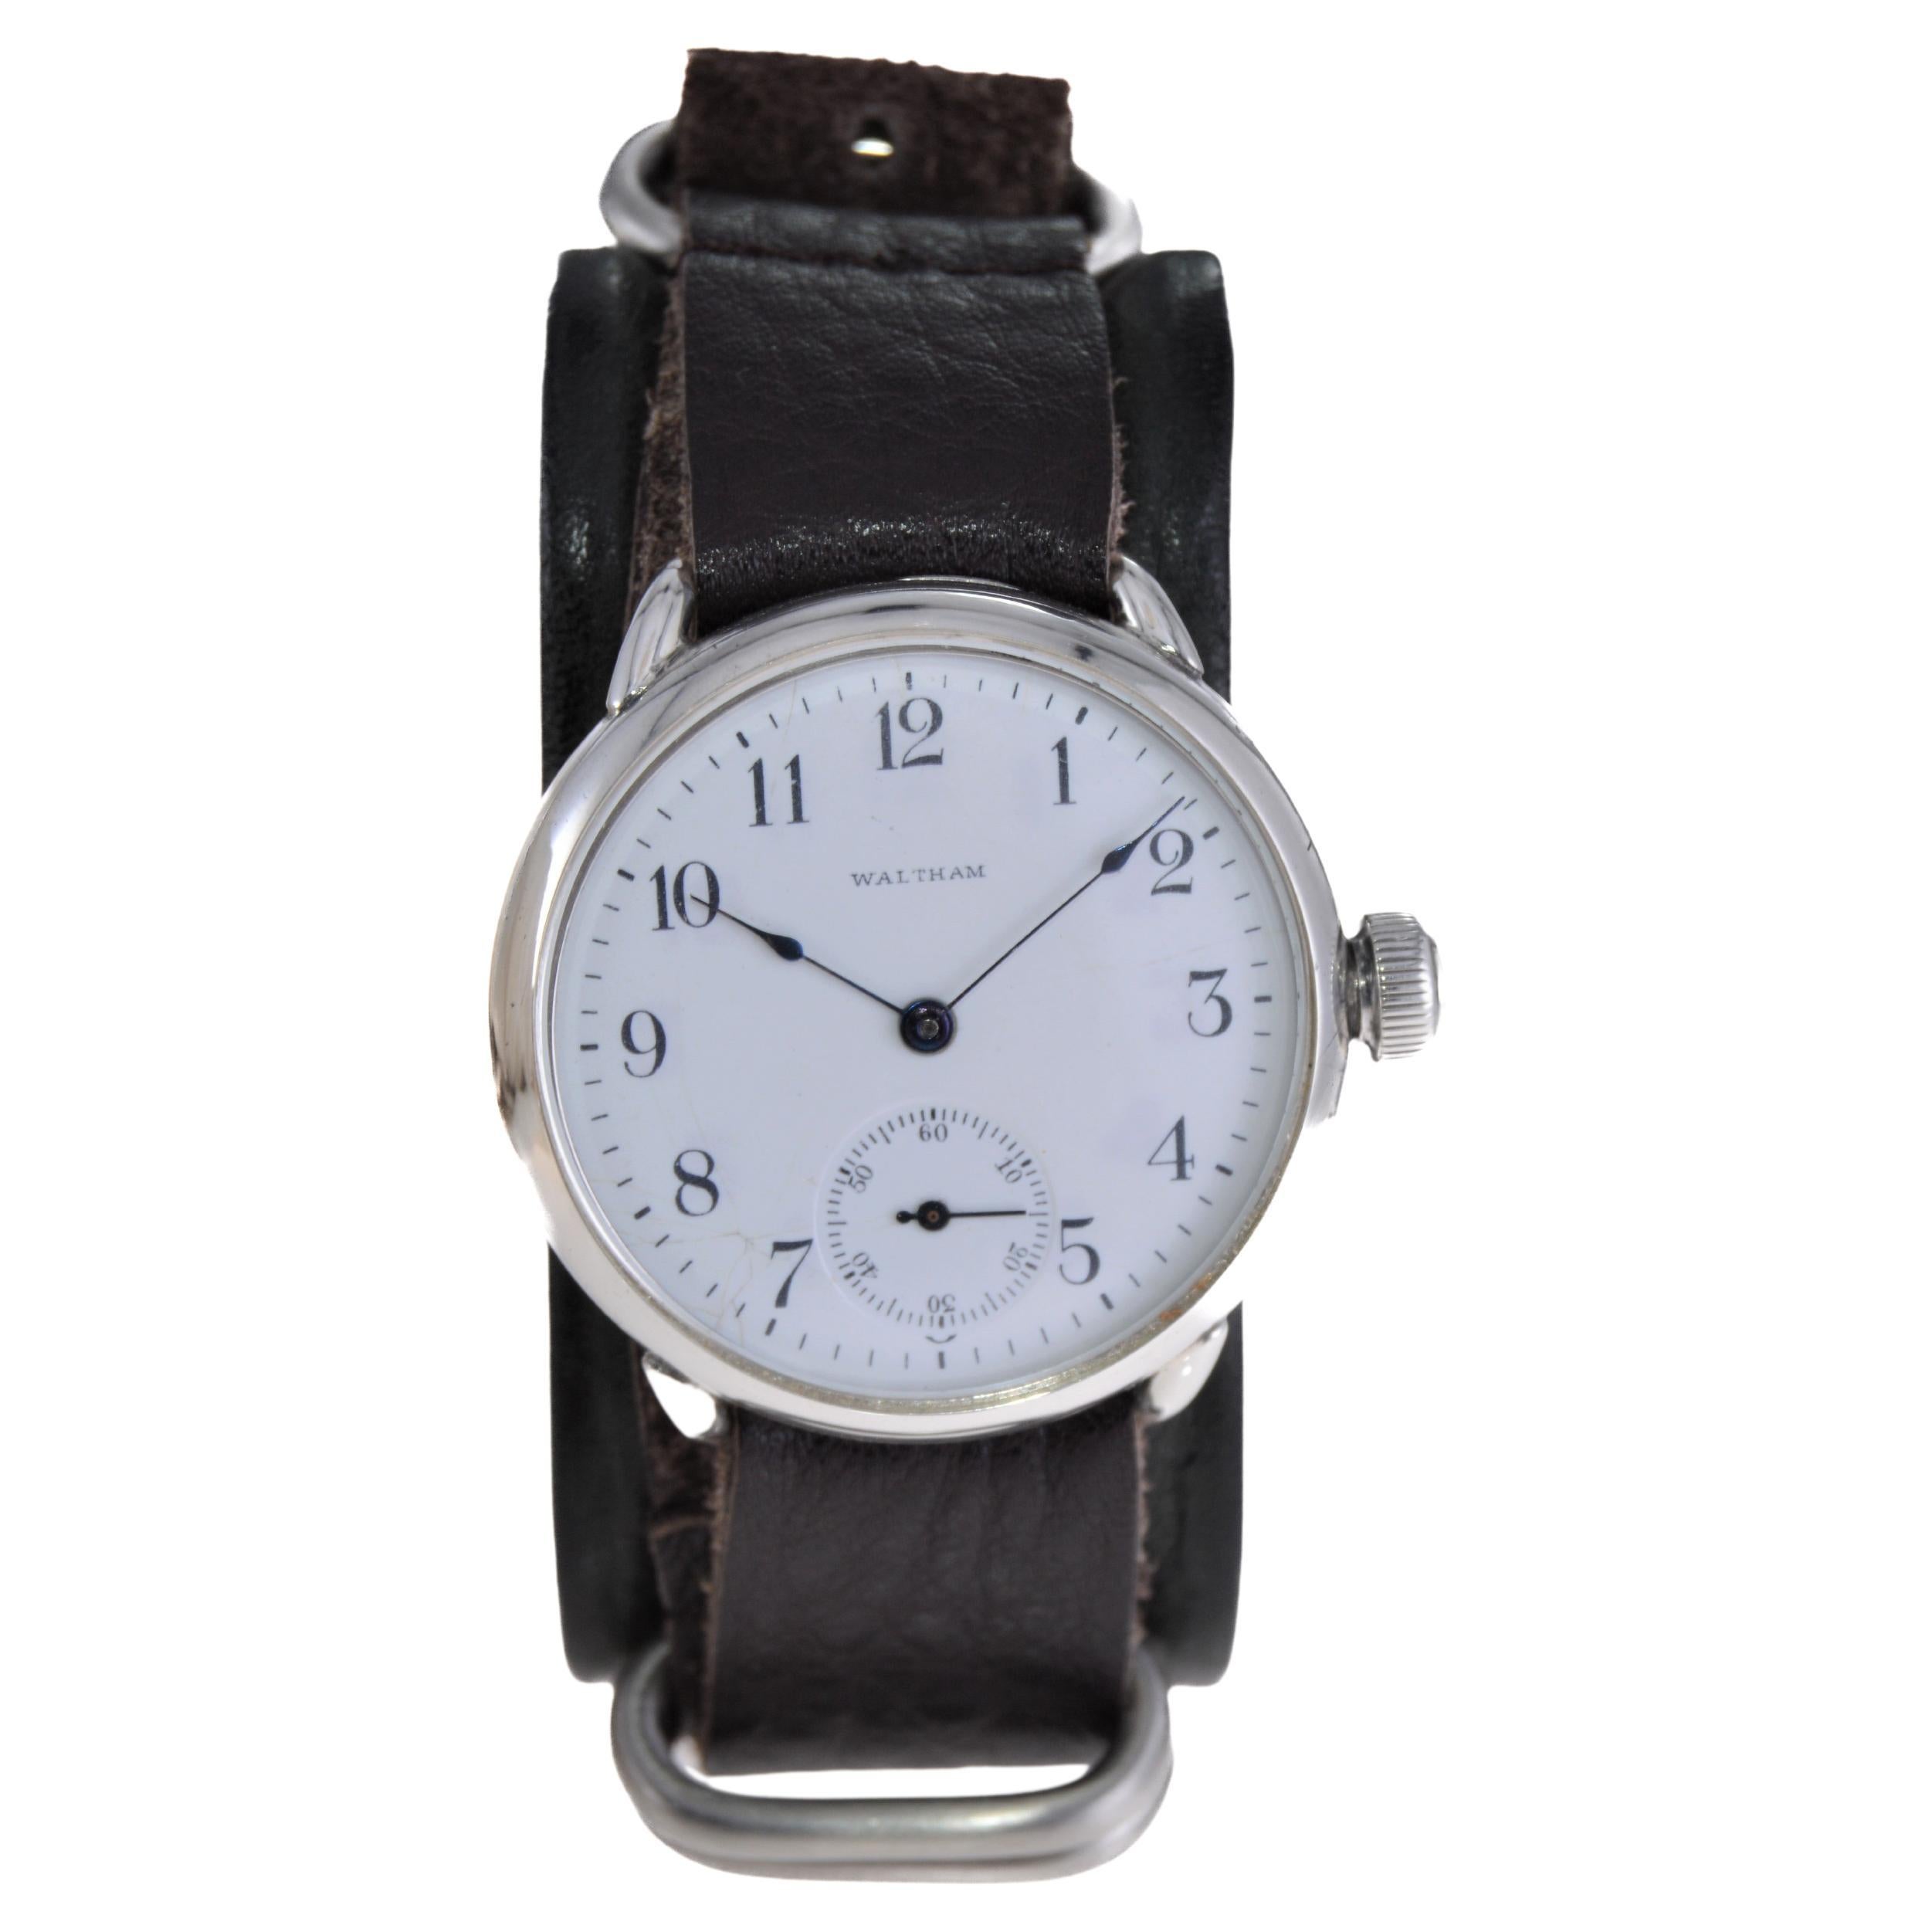 Waltham Sterling Silver Campaign Style Watch from 1901 with Original Enamel Dial